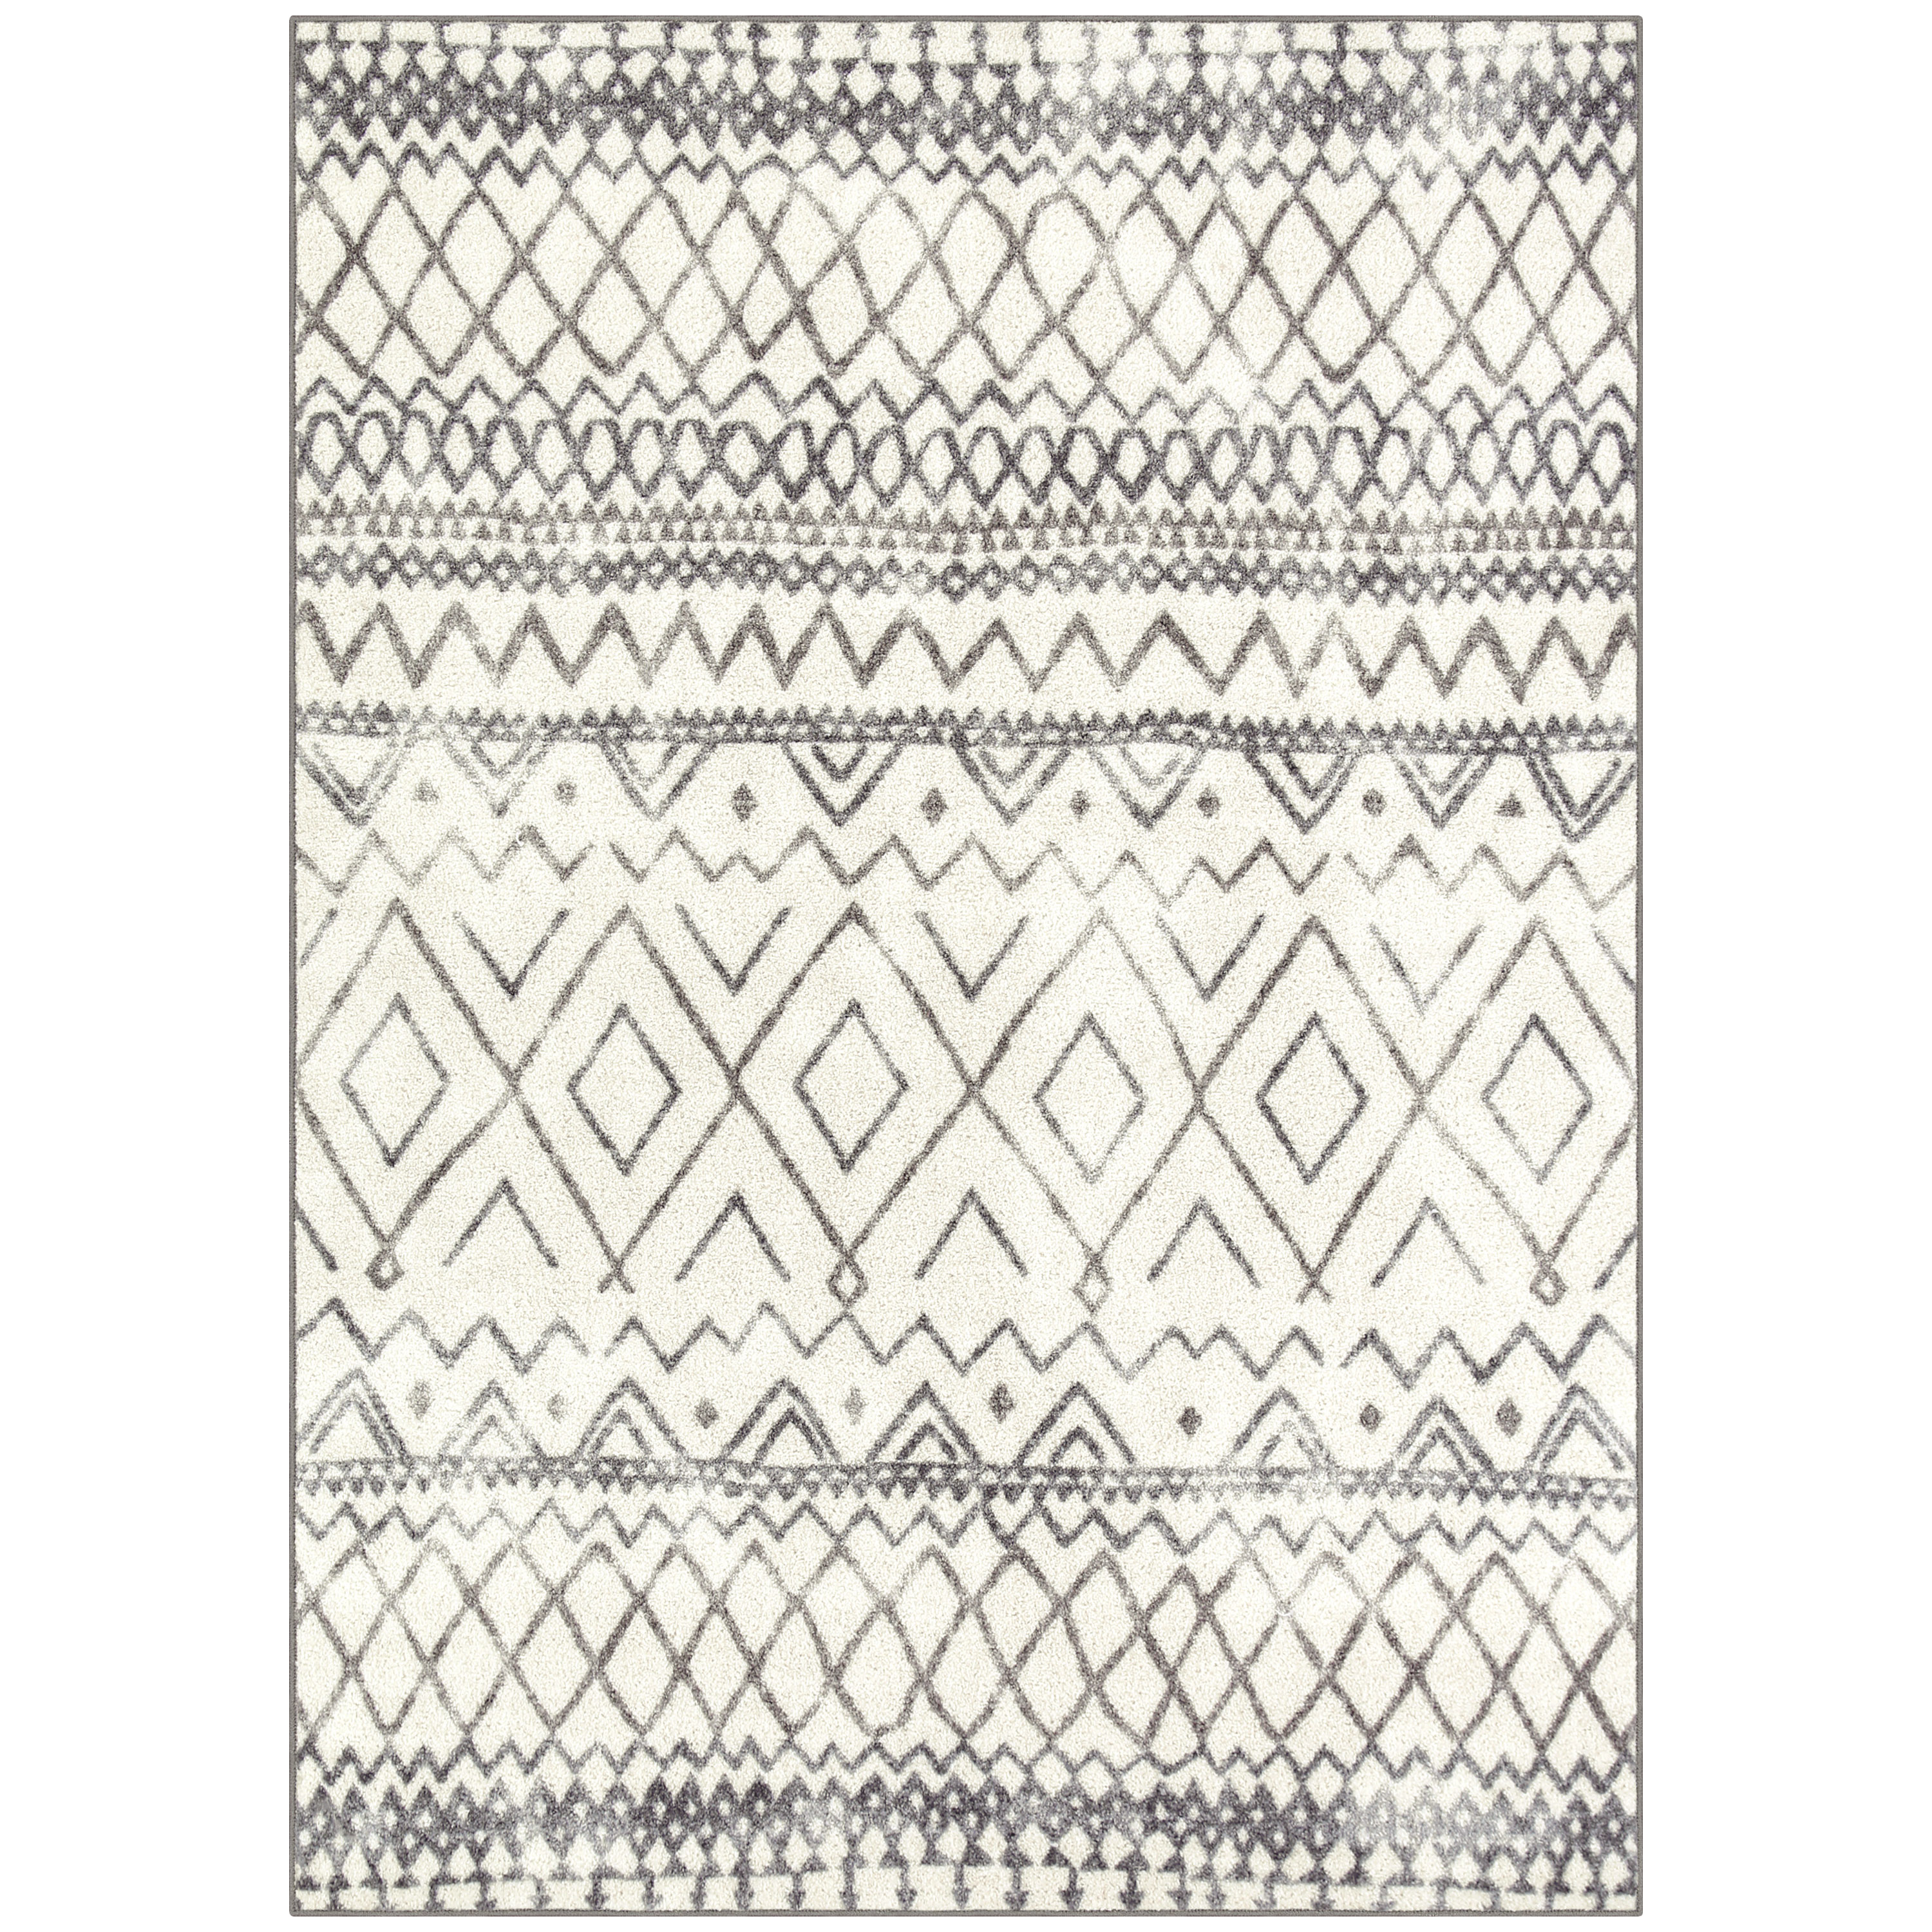 Maples Rugs Distressed Bohemian Diamond Indoor Area Rug, Ivory|Gray, 5' x 7' - image 1 of 7